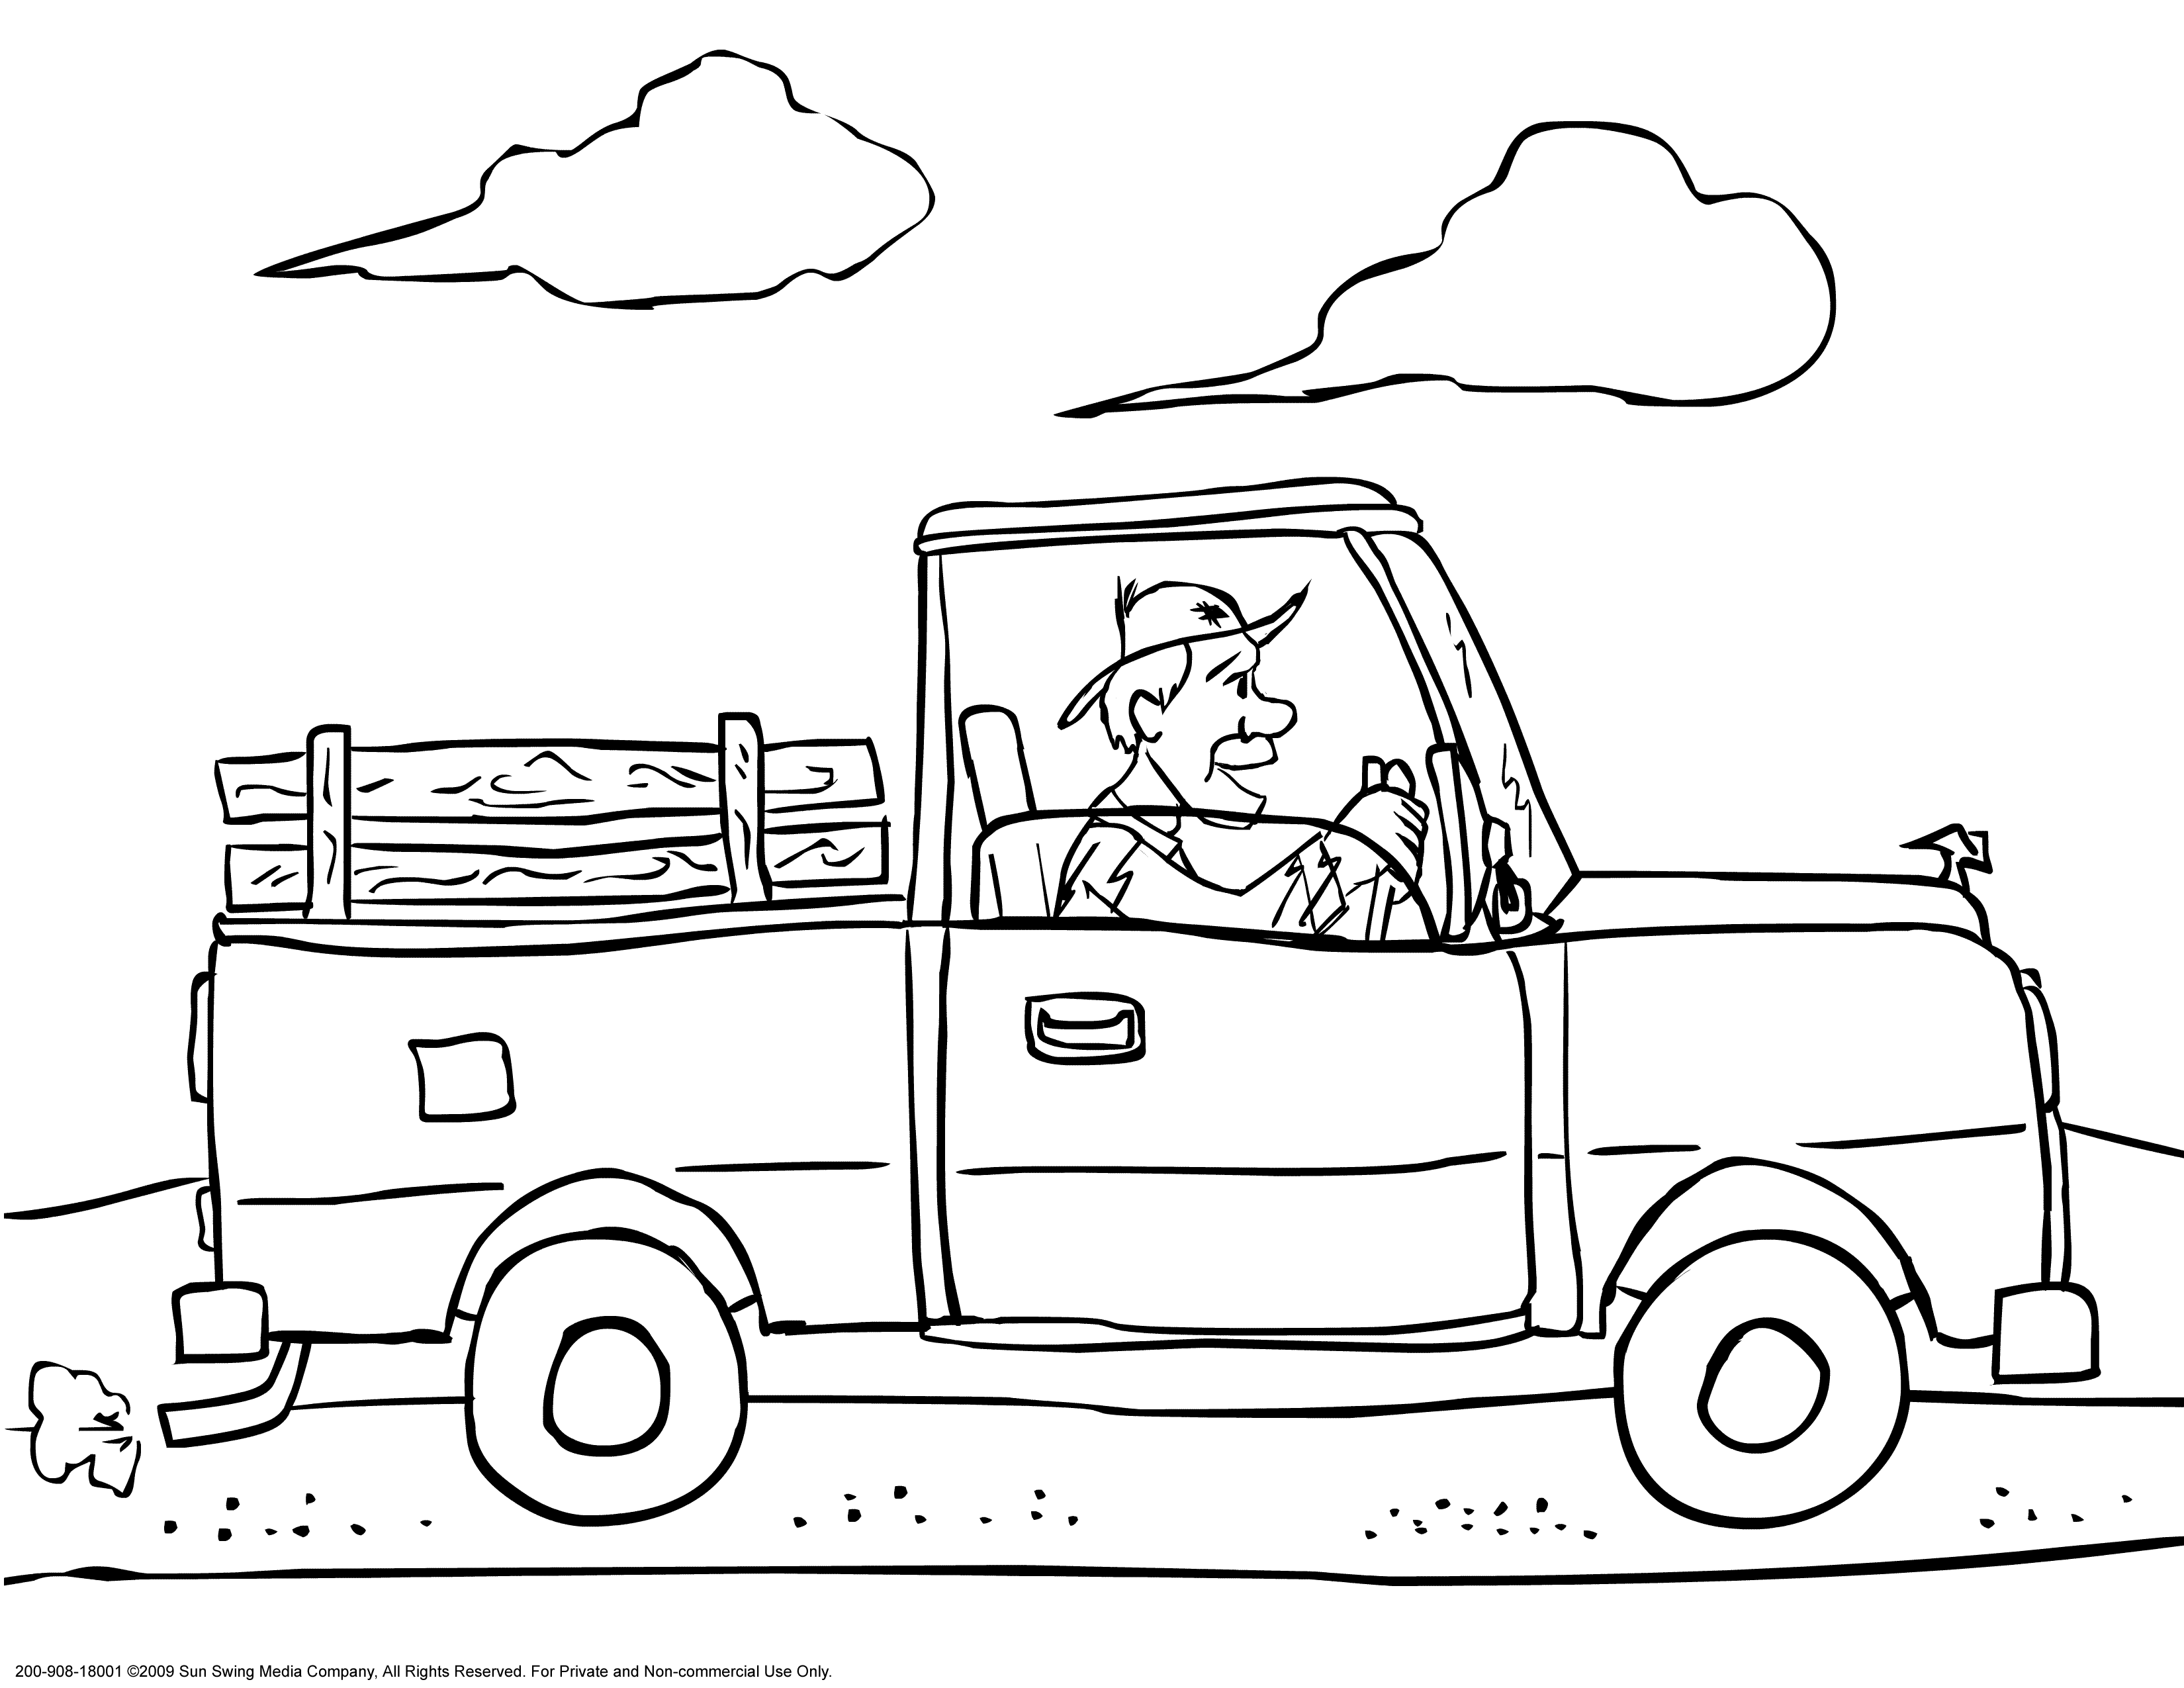 Truck coloring pages | color printing | coloring sheets | #23